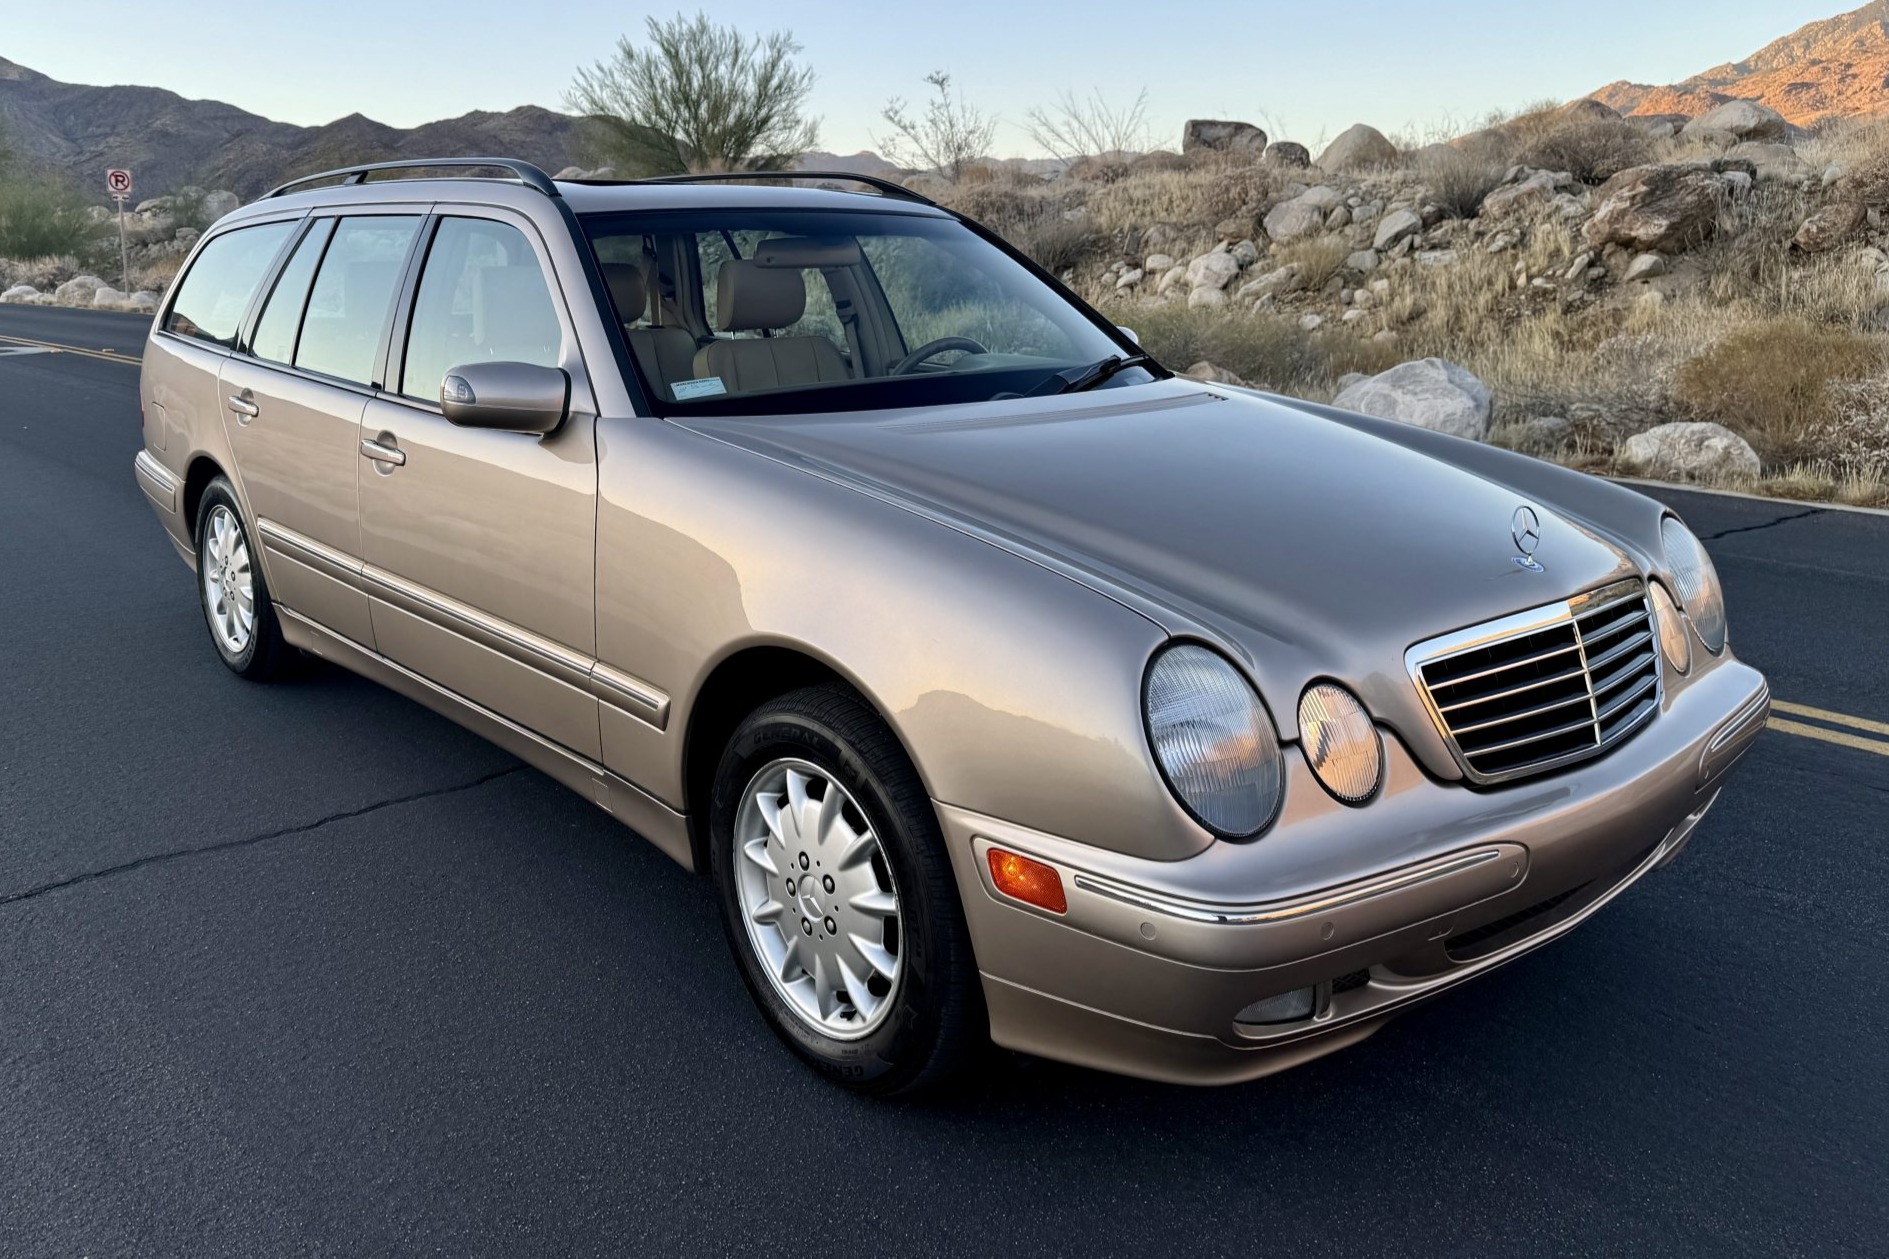 Used 2001 Mercedes-Benz E320 4MATIC Wagon Review